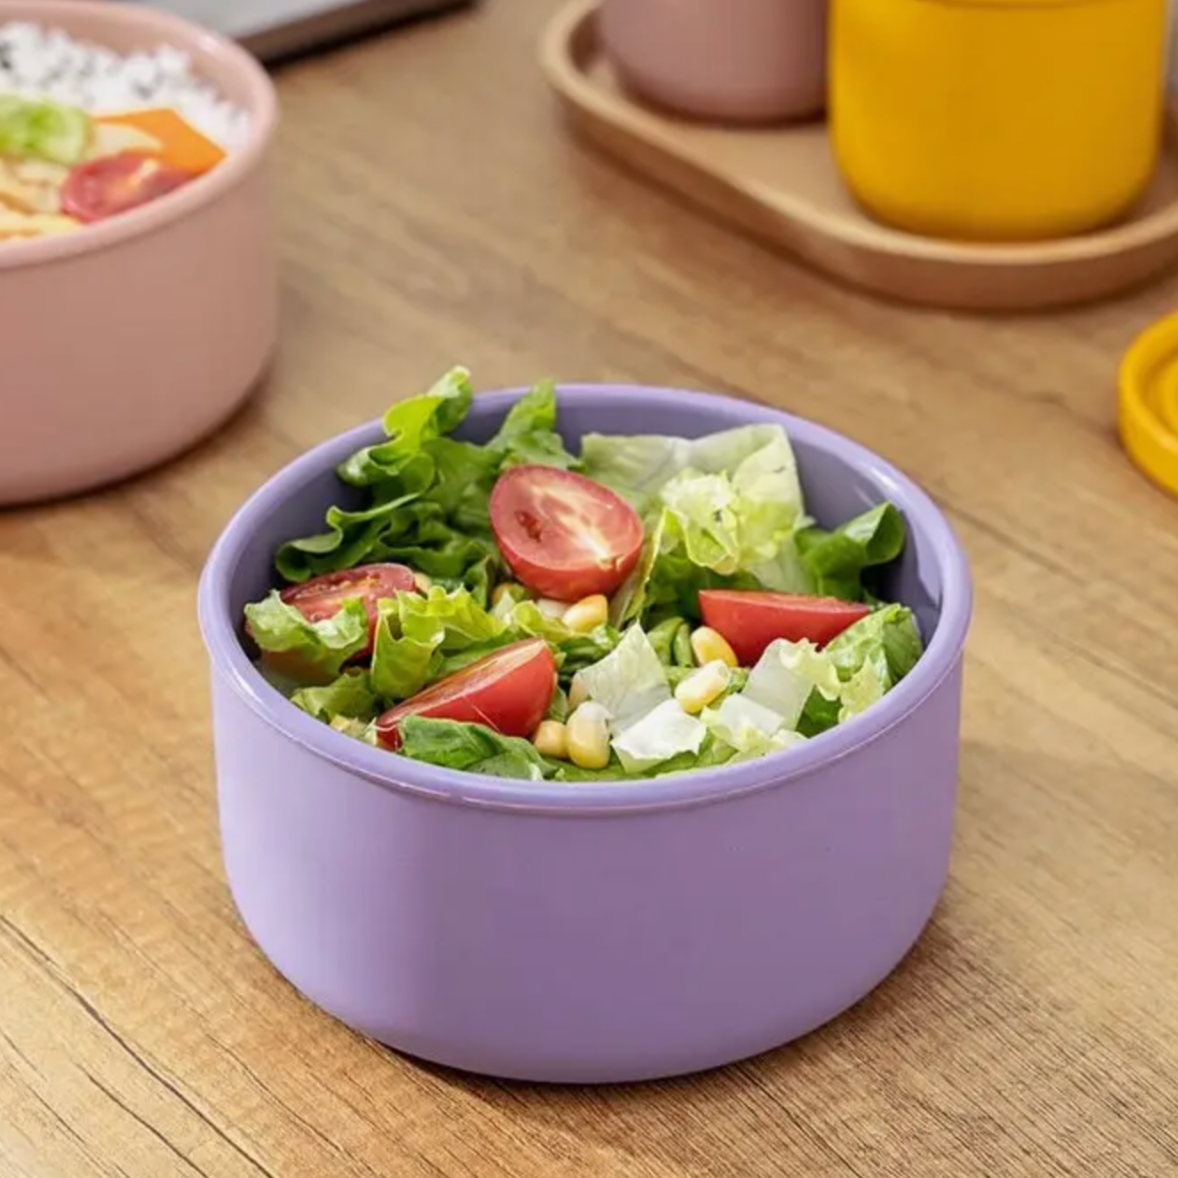  Silicone Lunch Bento Box, 52 Pack Bento Lunch Box